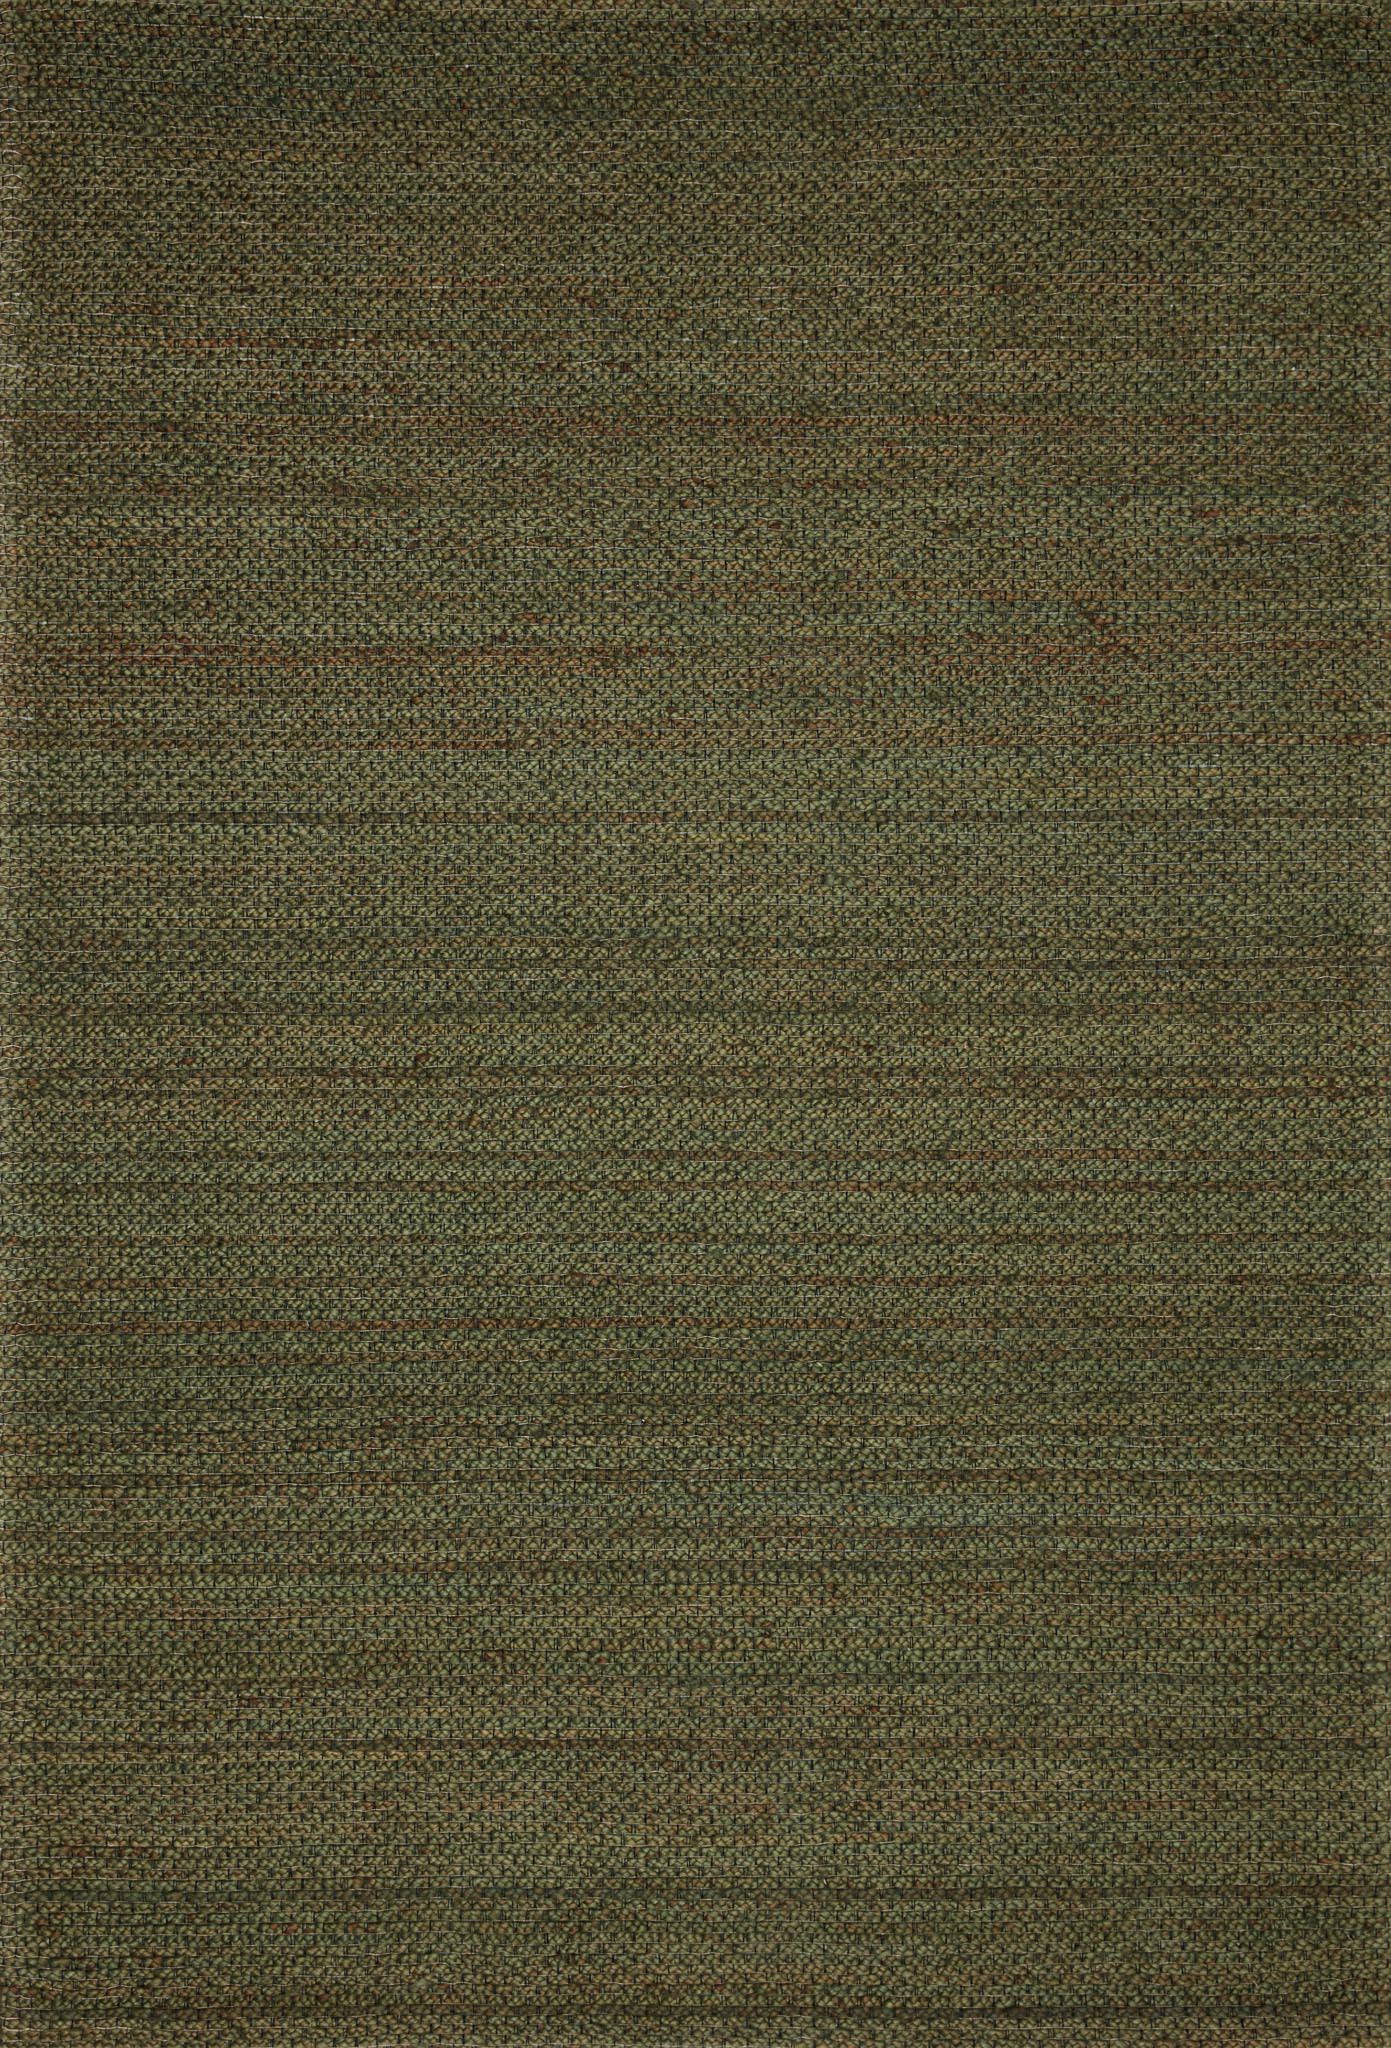 Loloi Lily LIL-01 Green Area Rug Main Image